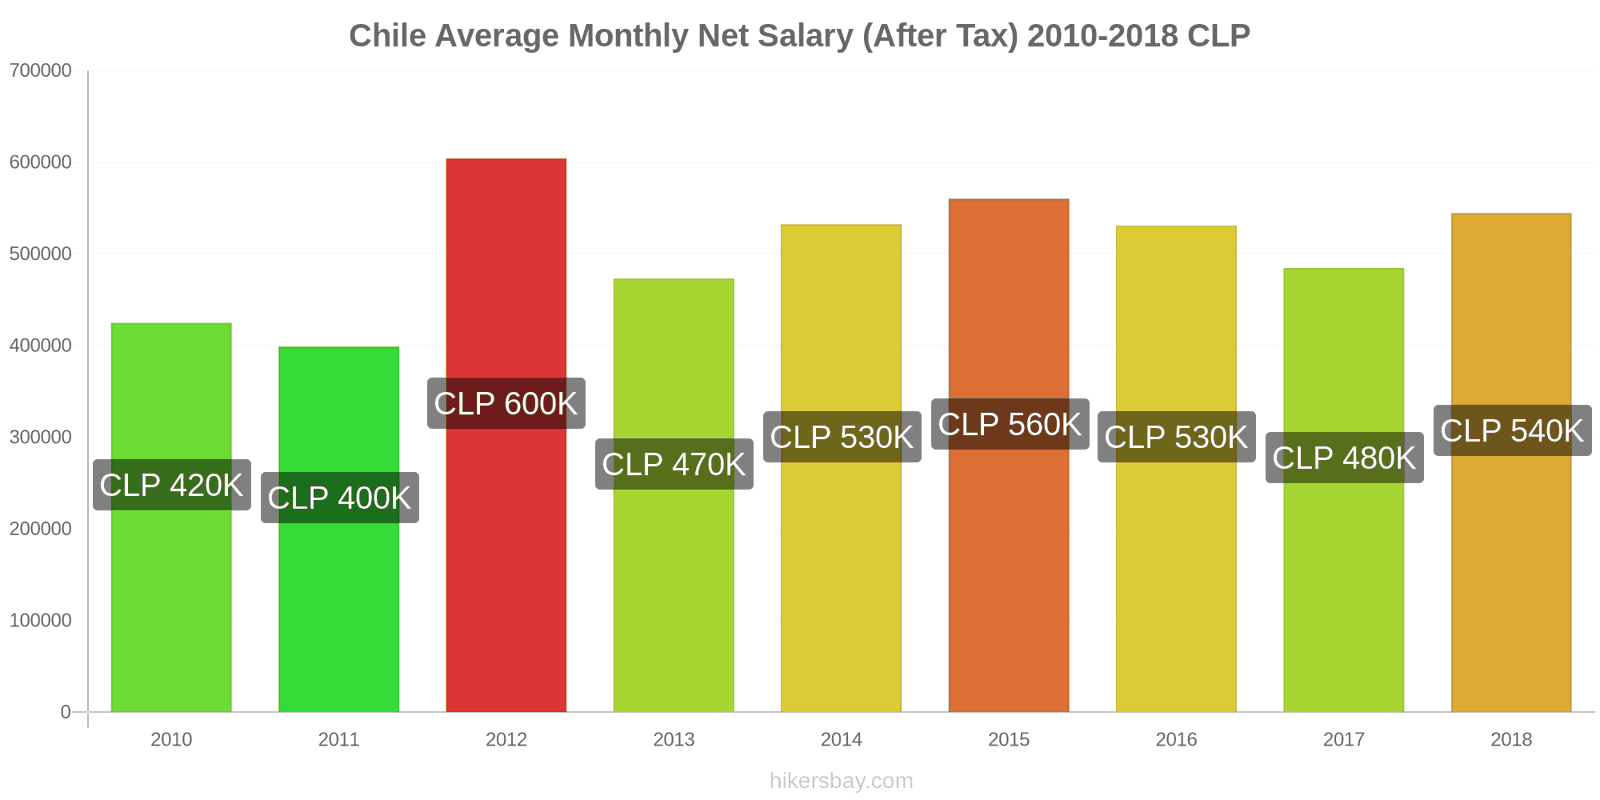 Chile price changes Average Monthly Net Salary (After Tax) hikersbay.com